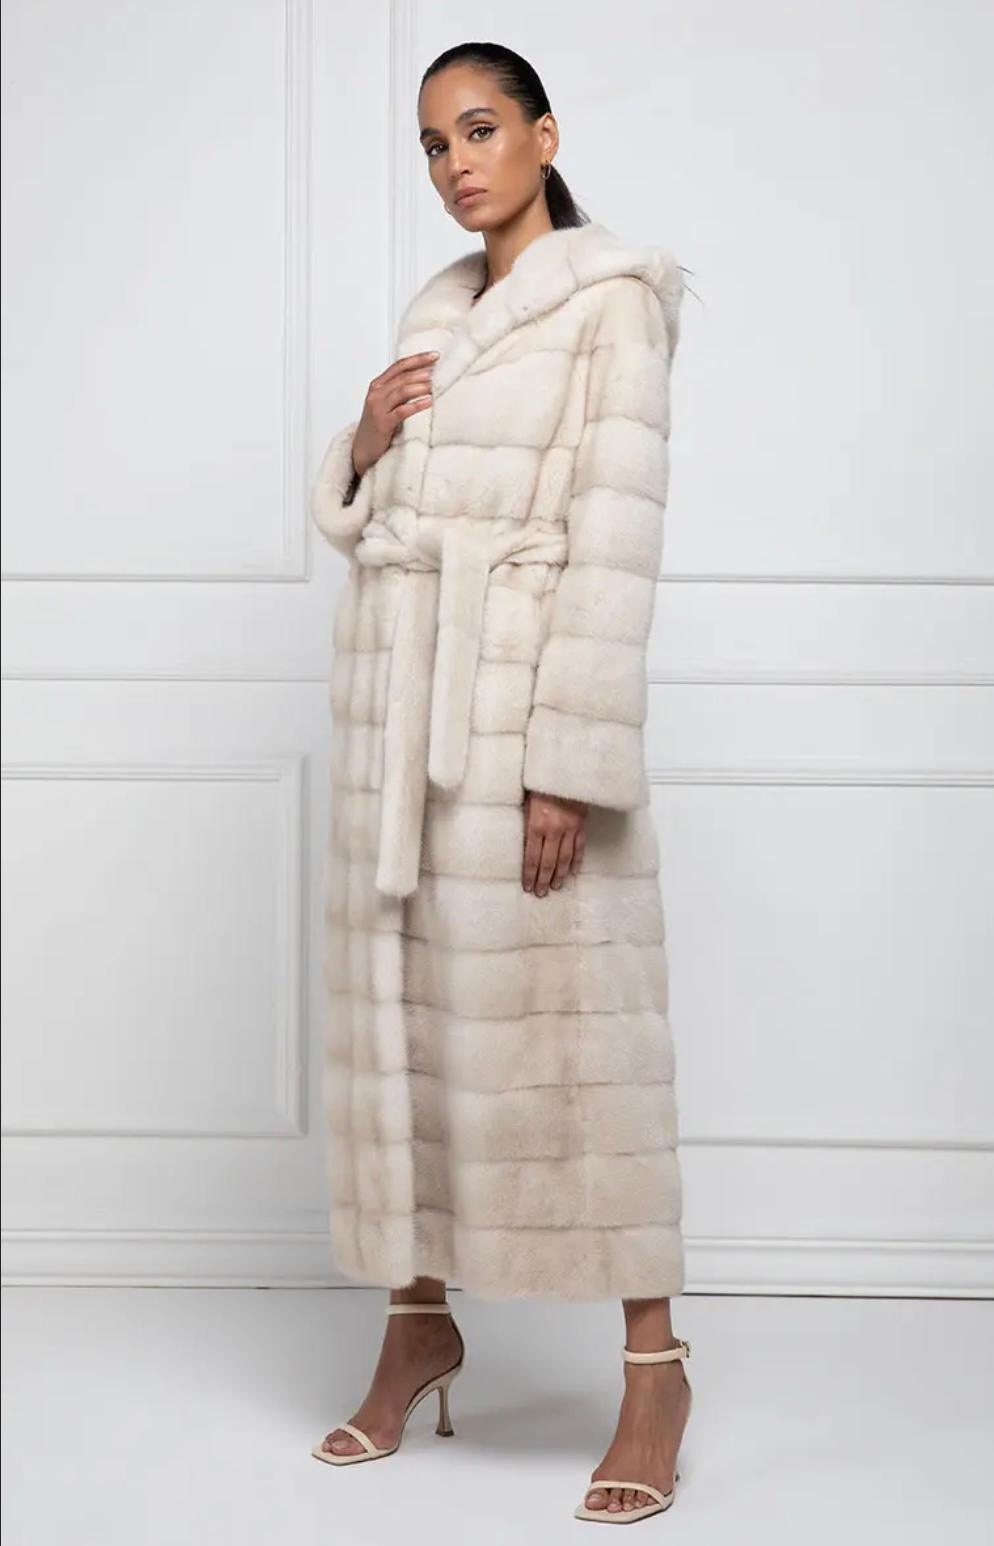 Female Mink Coat
Pearl Mink Coat with full skins. Also this mink coat, as the most part of the collection, is made using female mink carefully selected by our laboratories. The type of mink fur used for this mink coat is Danish, precisely from the